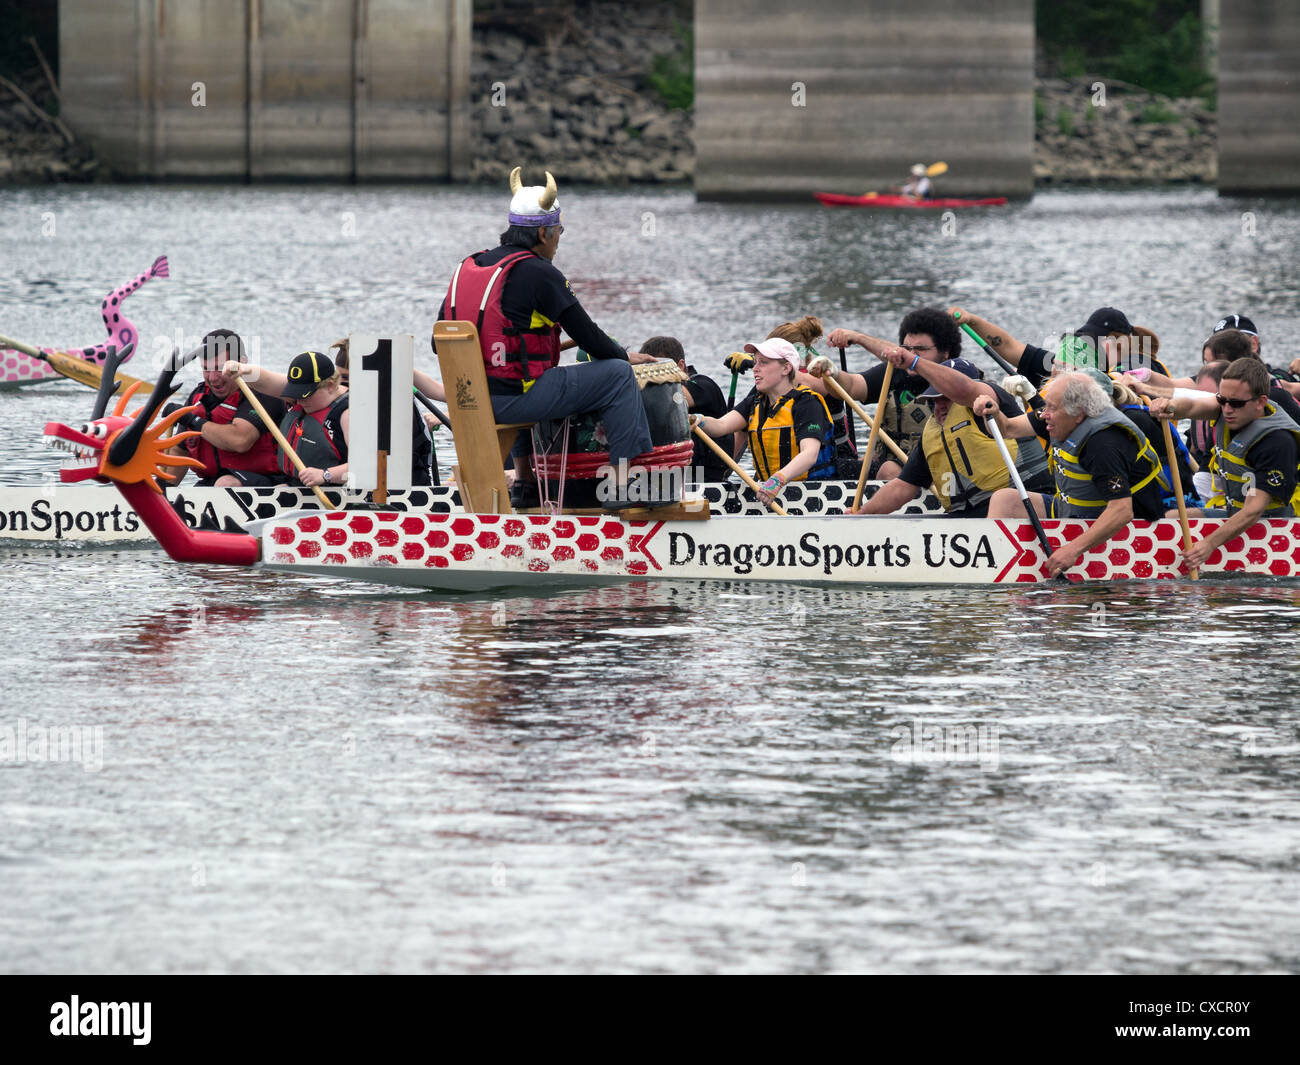 Stock photo of of dragon boats at the fall Dragon Boat Races in Portland Oregon. Stock Photo